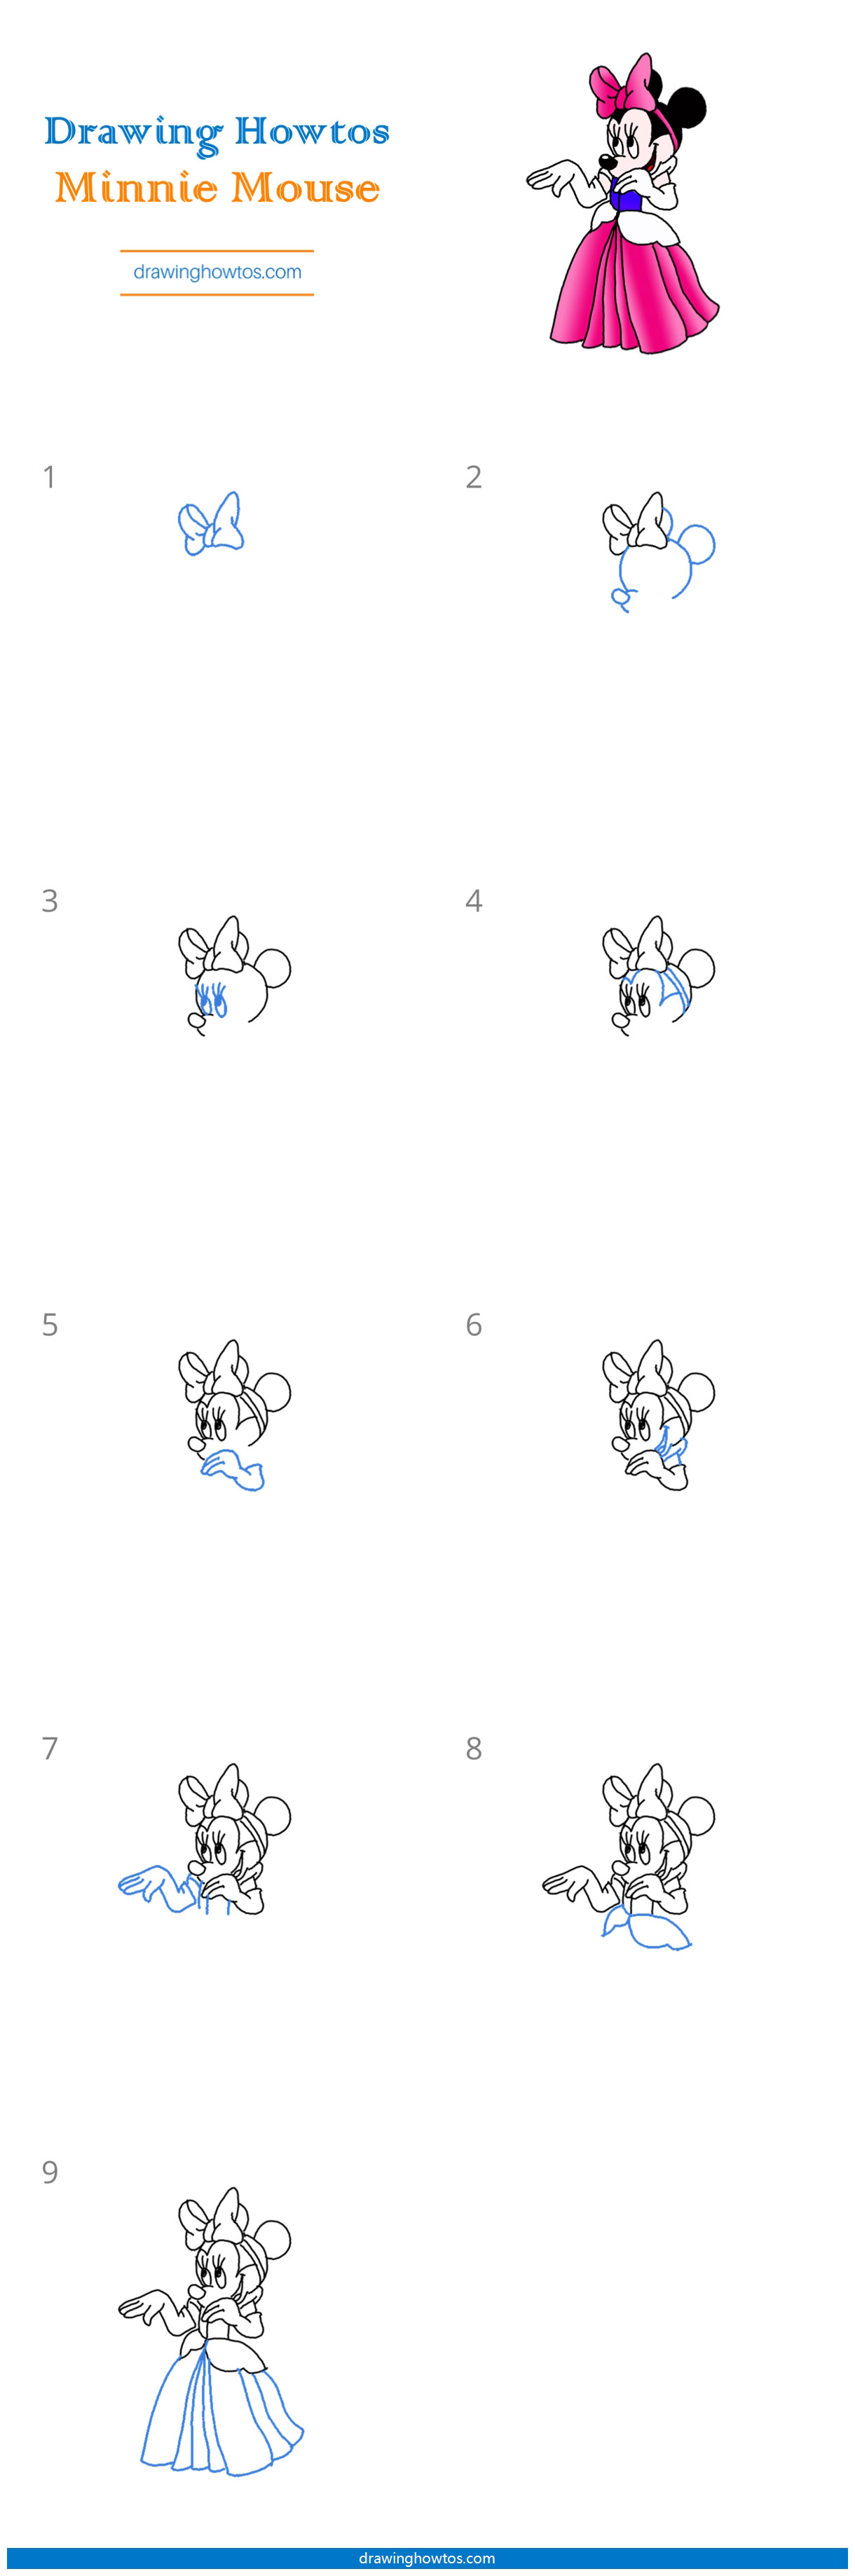 How to Draw Minnie Mouse Step by Step